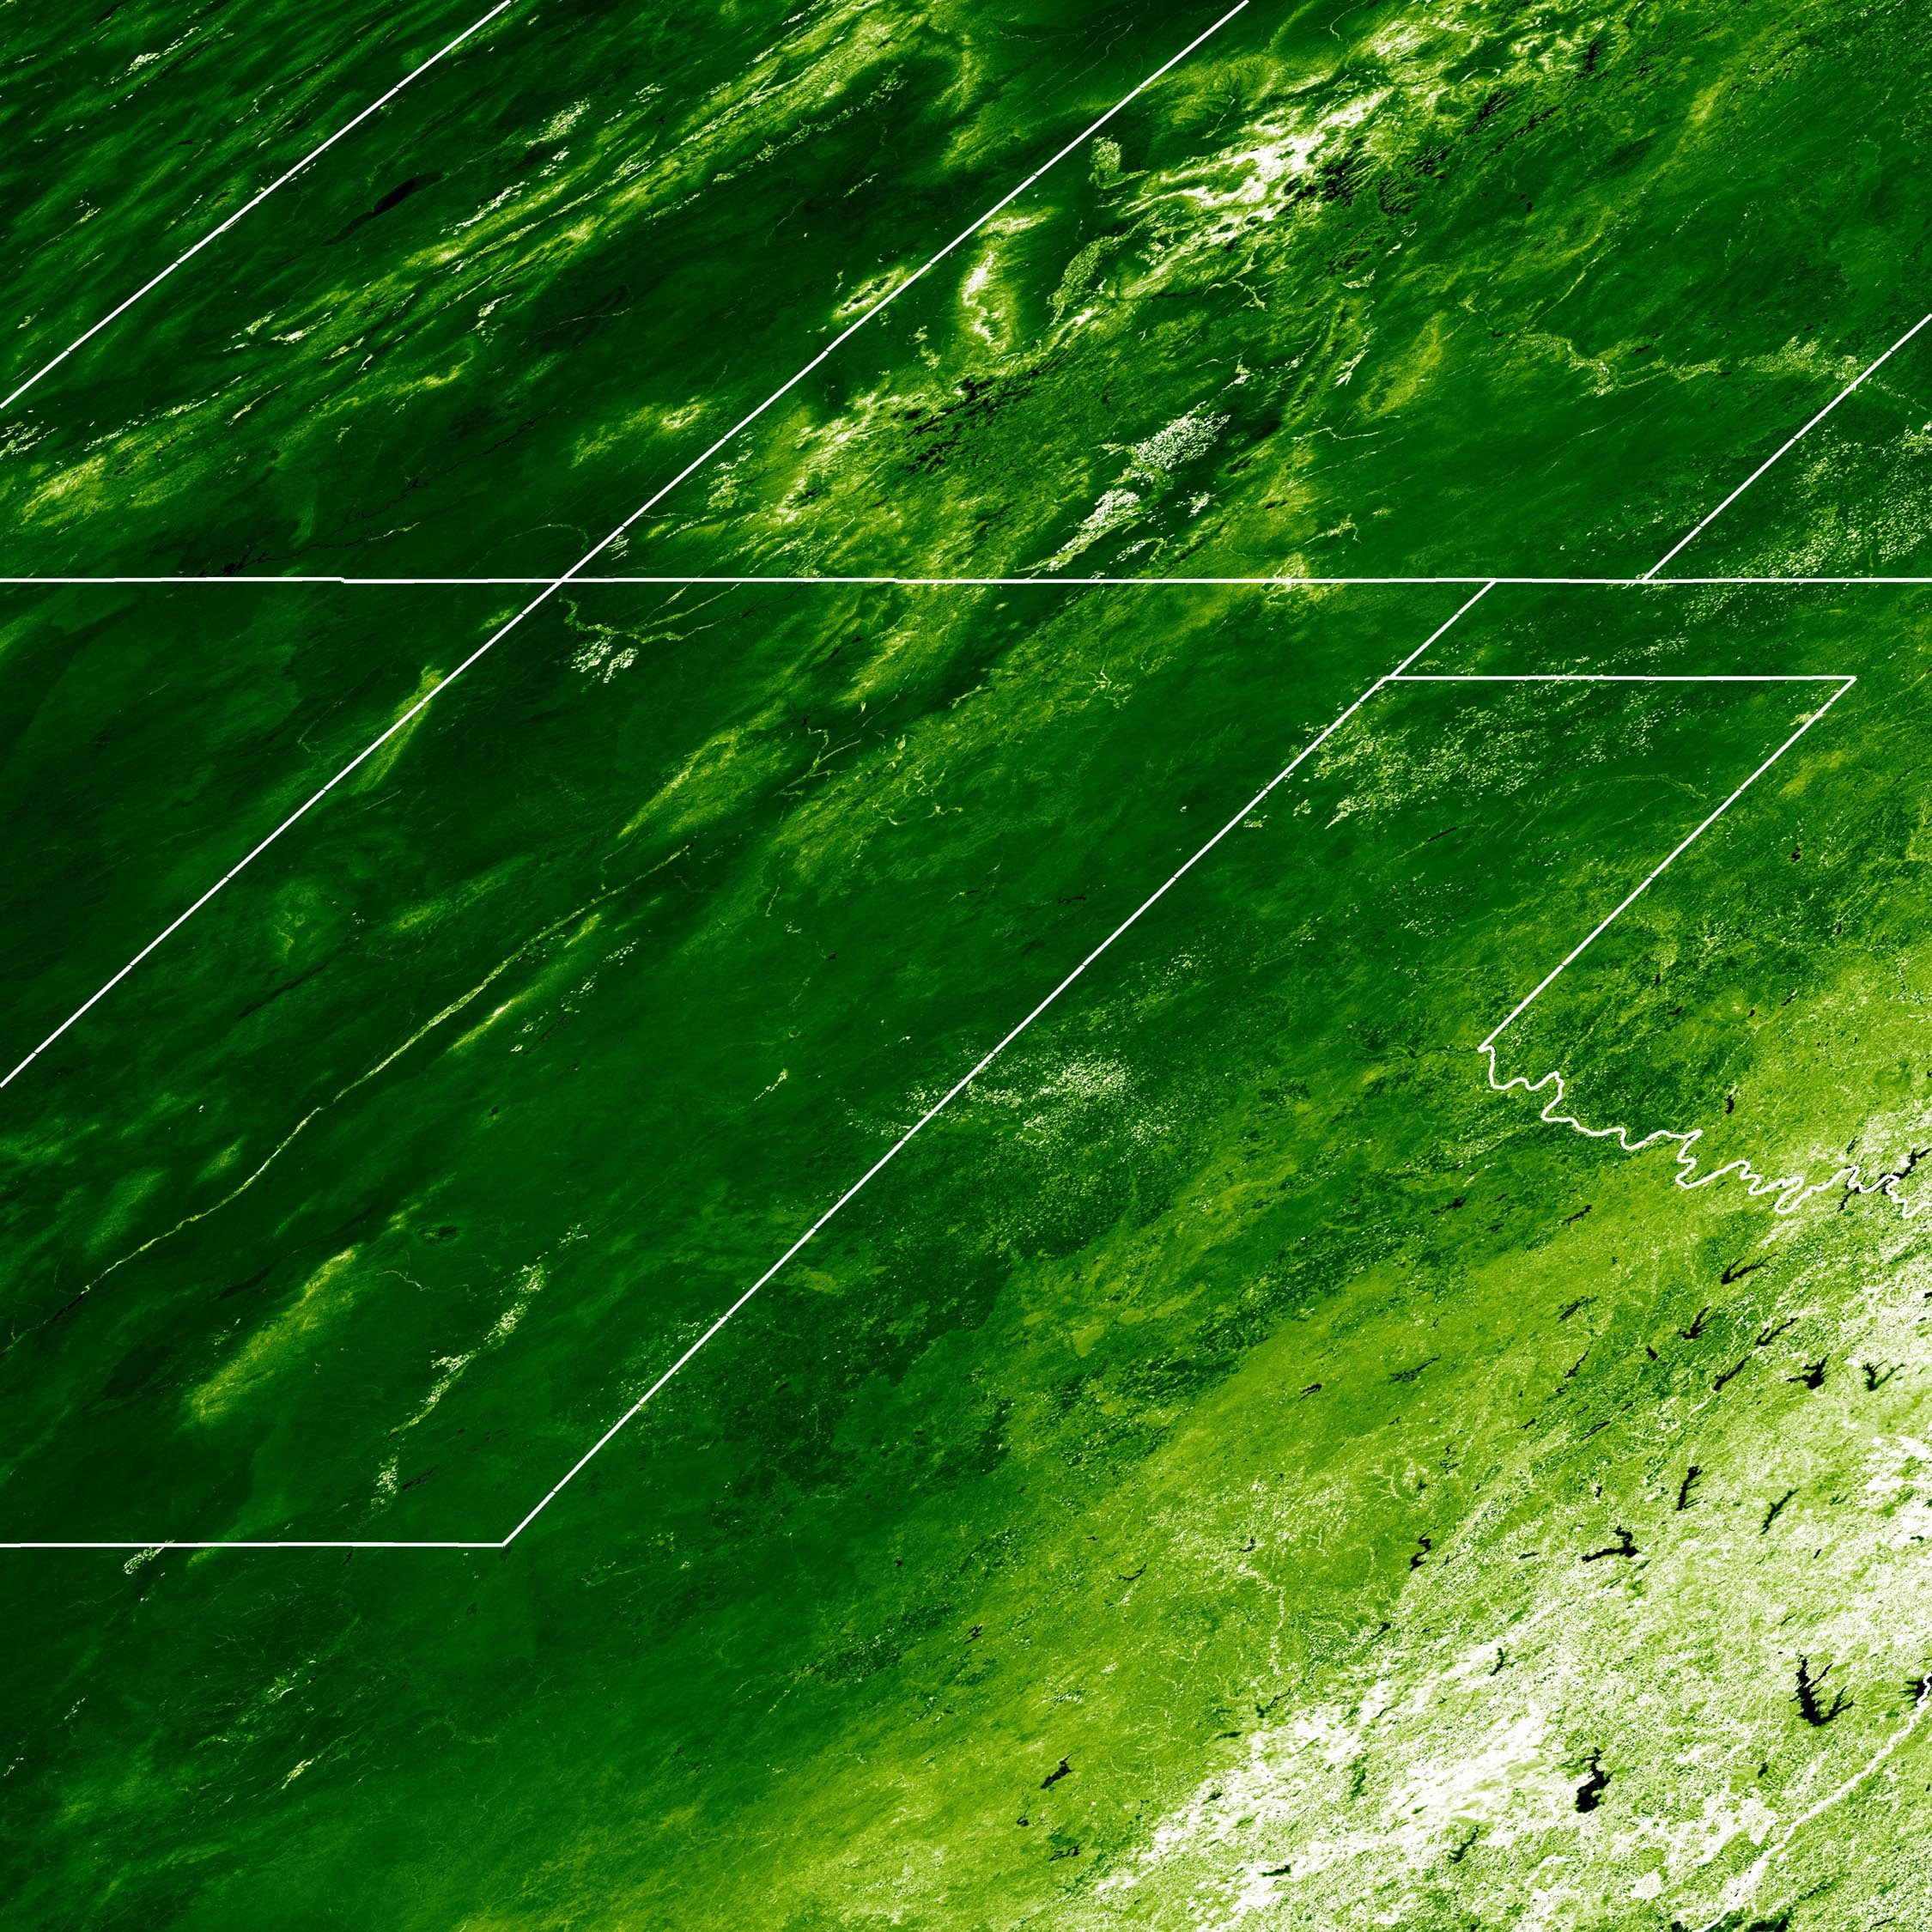 This satellite image uses what is known as the Enhanced Vegetation Index (EVI) to show plant cover in June 2004 in the U.S. Four Corners region of Utah, Colorado, New Mexico and Arizona. Also shown are parts of Nevada, Texas, Oklahoma and Kansas. Lighter, brighter greens indicate a greater amount of green plant cover. University of Utah geographers and a biologist have shown that in areas where deer mice carry the deadly hantavirus, a surge in greenery shown on satellite images can help predict increased mouse populations and risk of hantavirus transmission more than a year later. The same method may be used to help forecast outbreaks of other rodent-borne diseases. The image was made from data from an instrument named MODIS on NASA's Terra satellite.